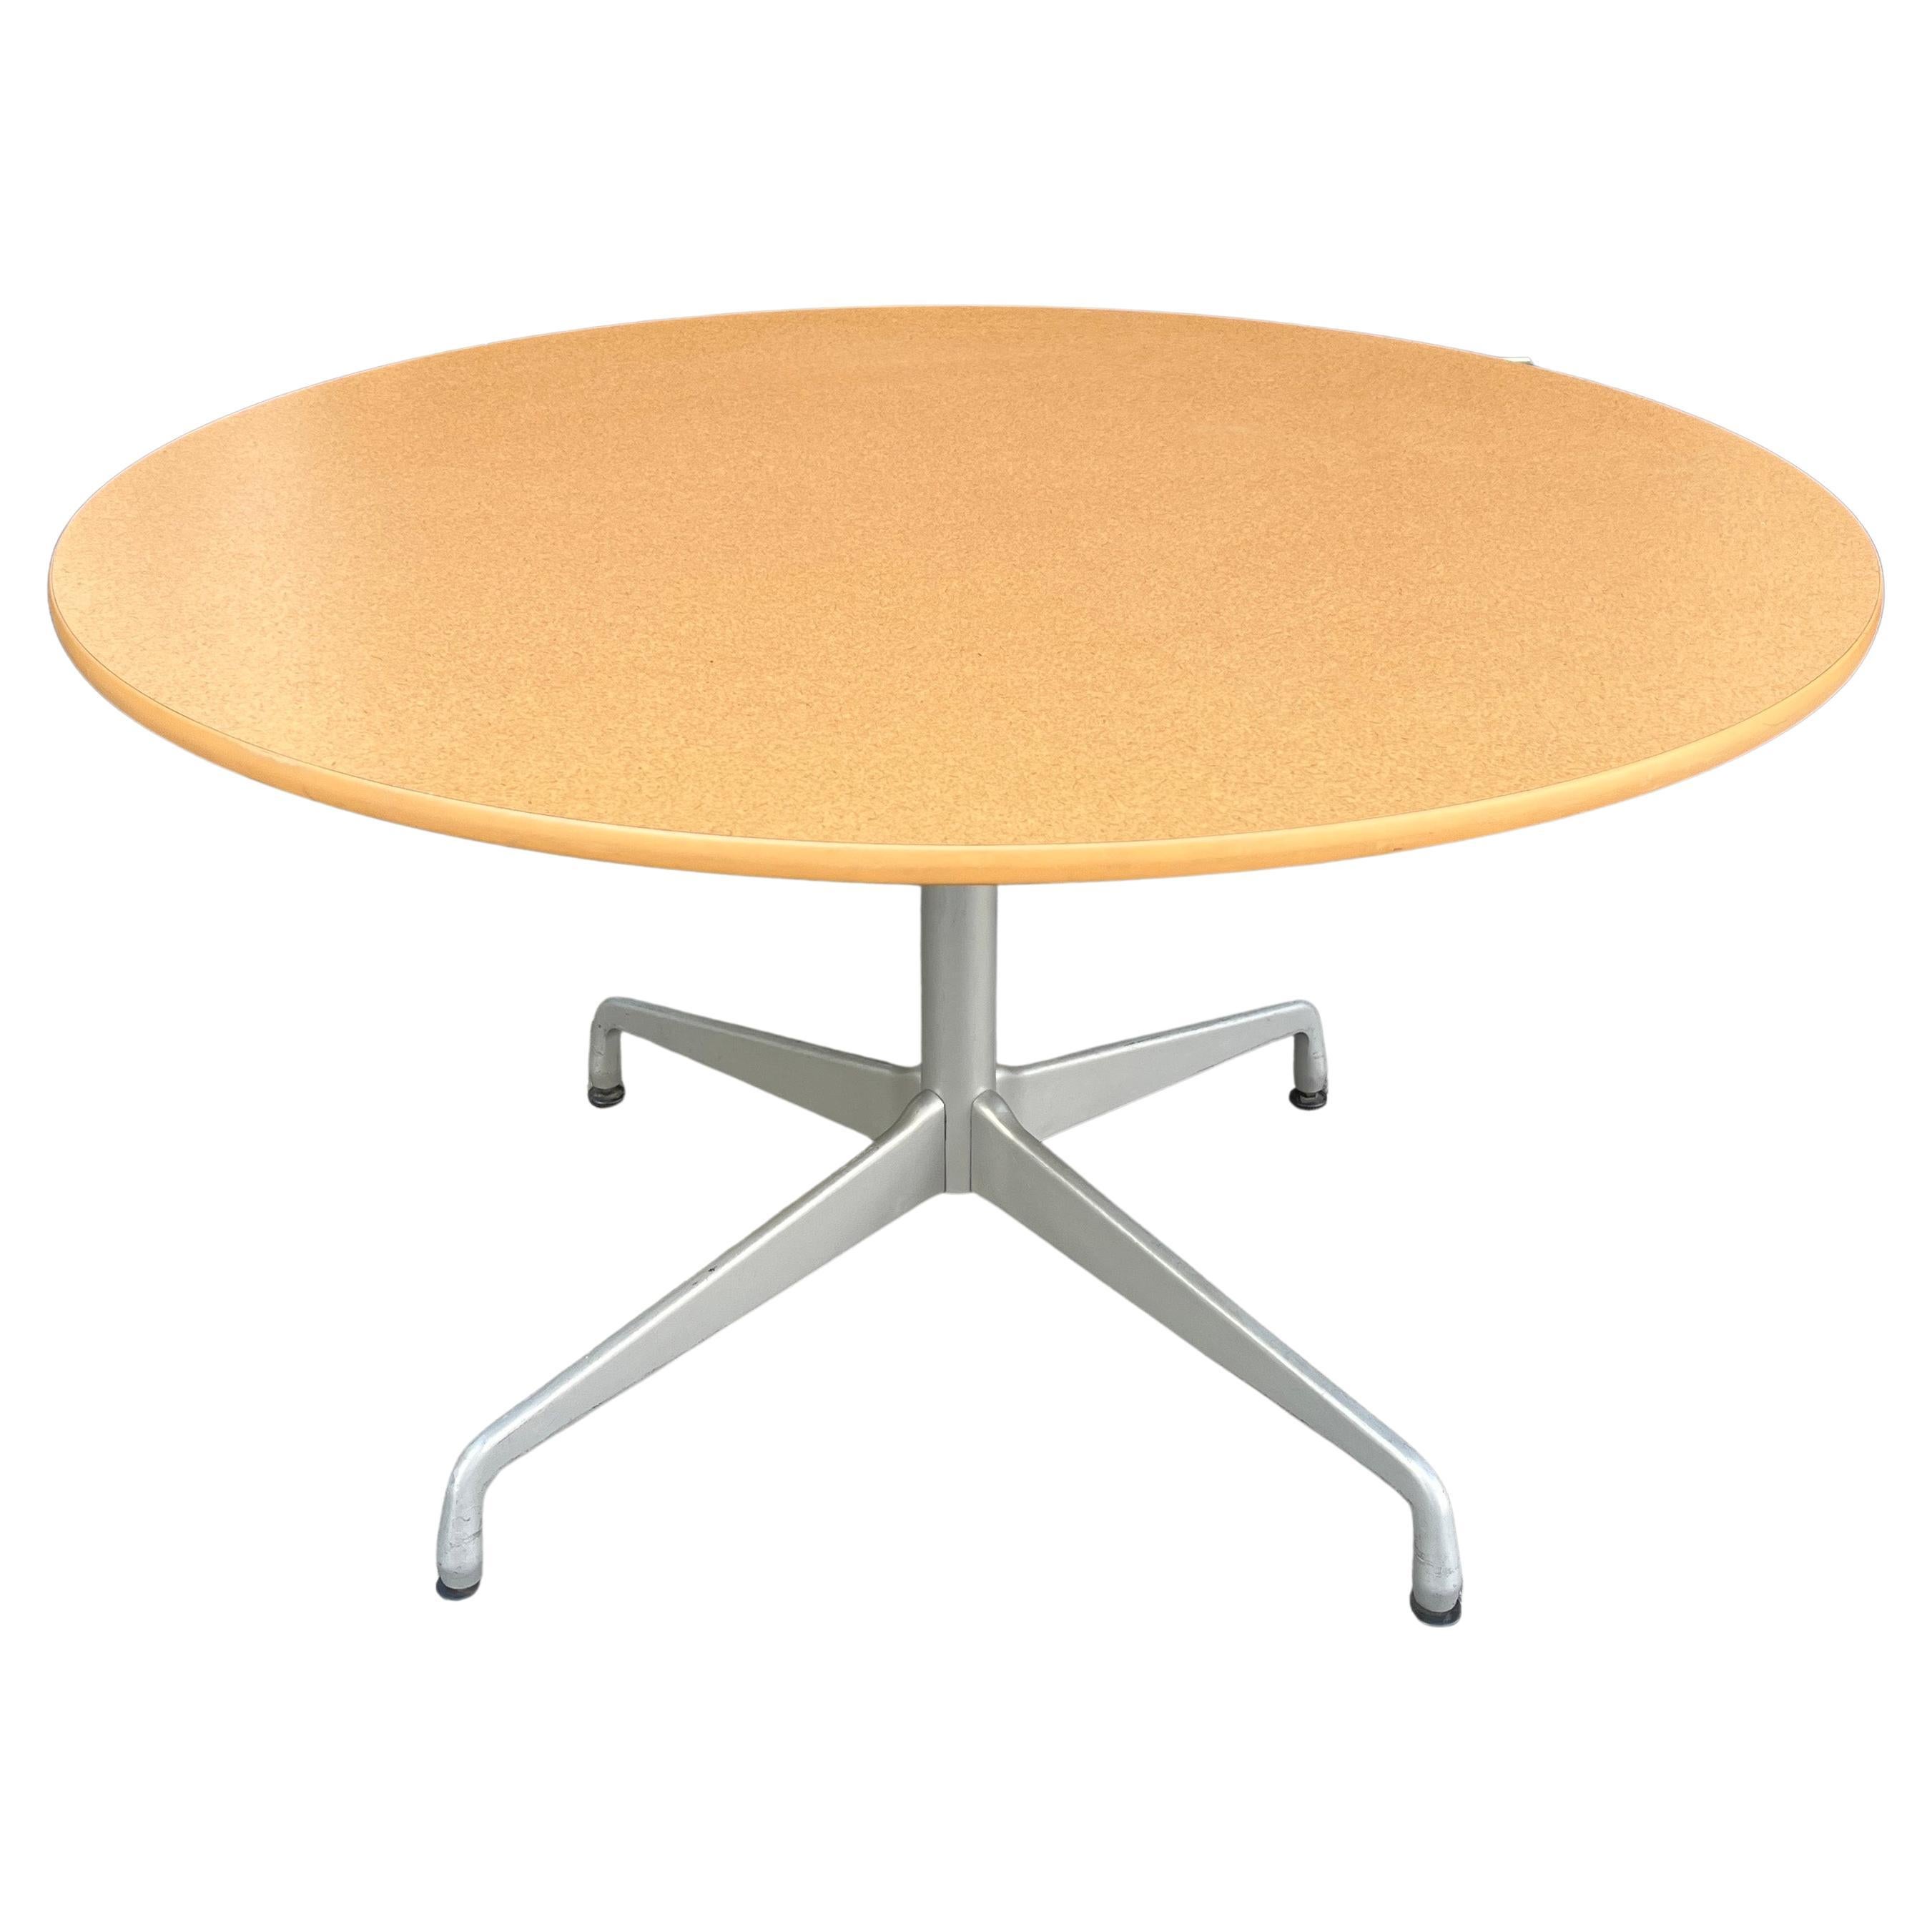 American Eames for Herman Miller Table Post Modern Look For Sale